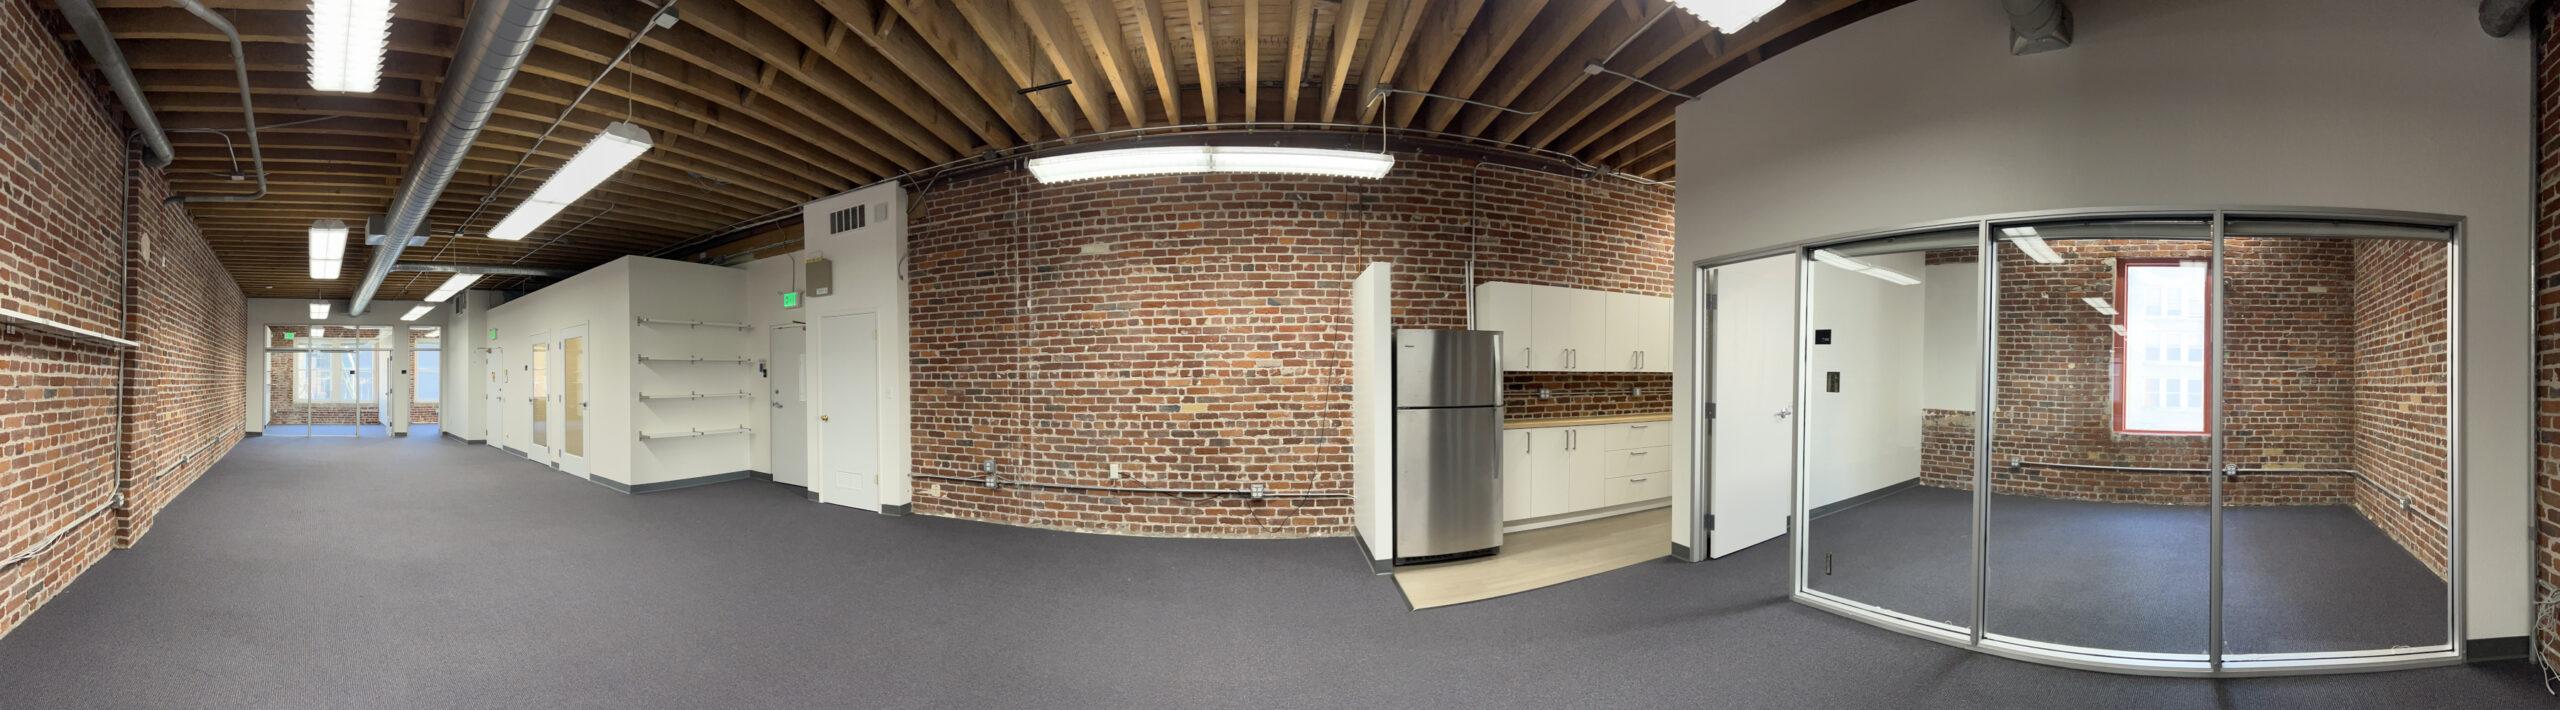 Brick & Timber SOMA Office Space for Lease